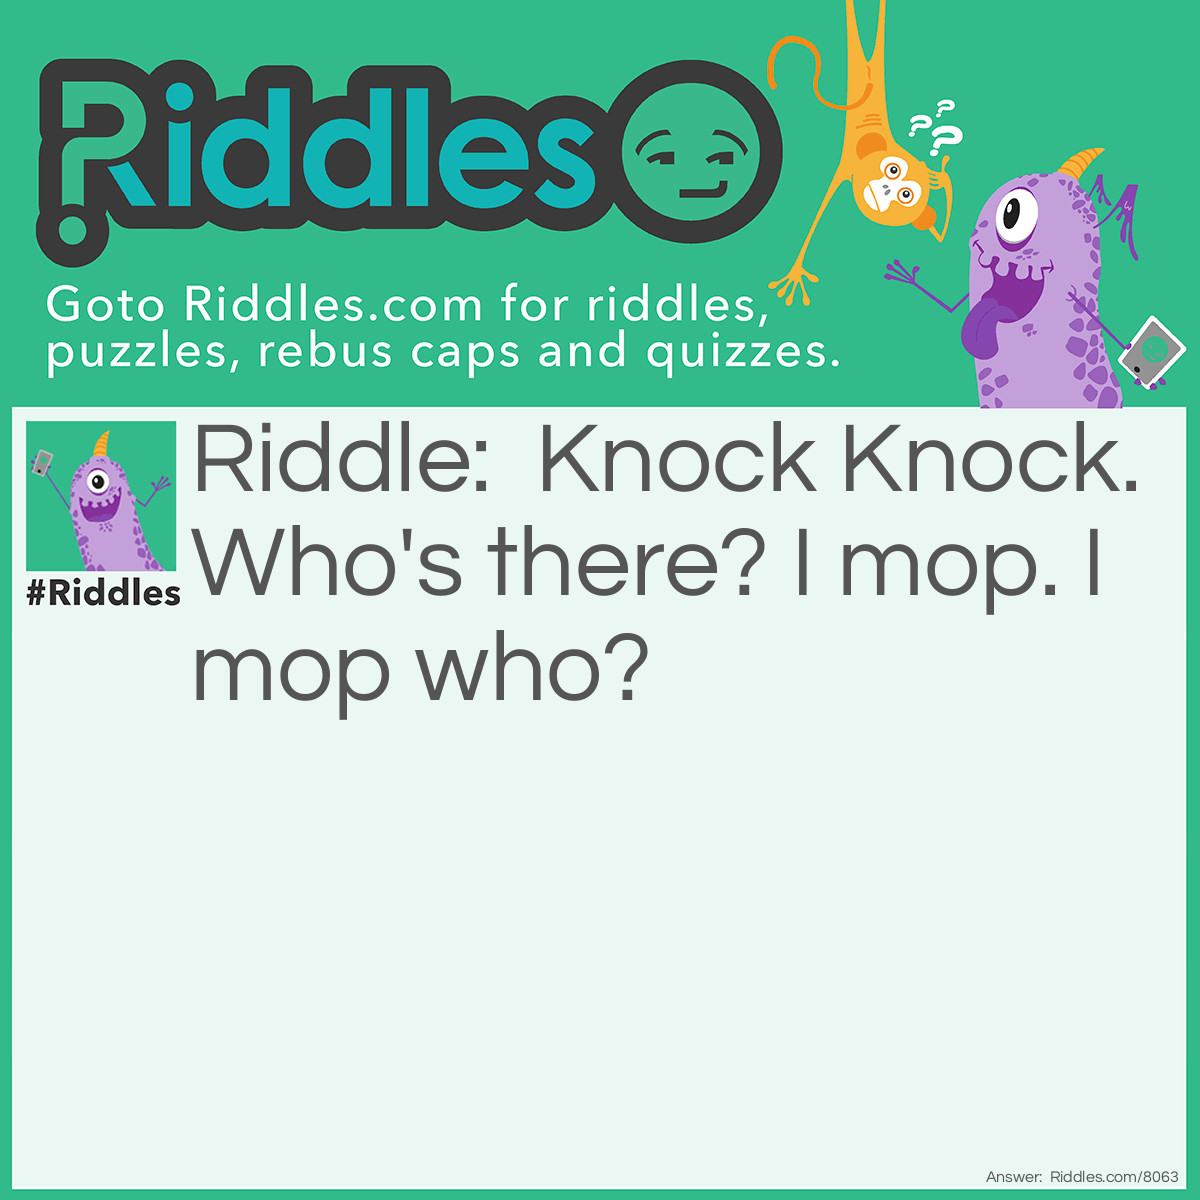 Riddle: Knock Knock. Who's there? I mop. I mop who? Answer: That's gross!